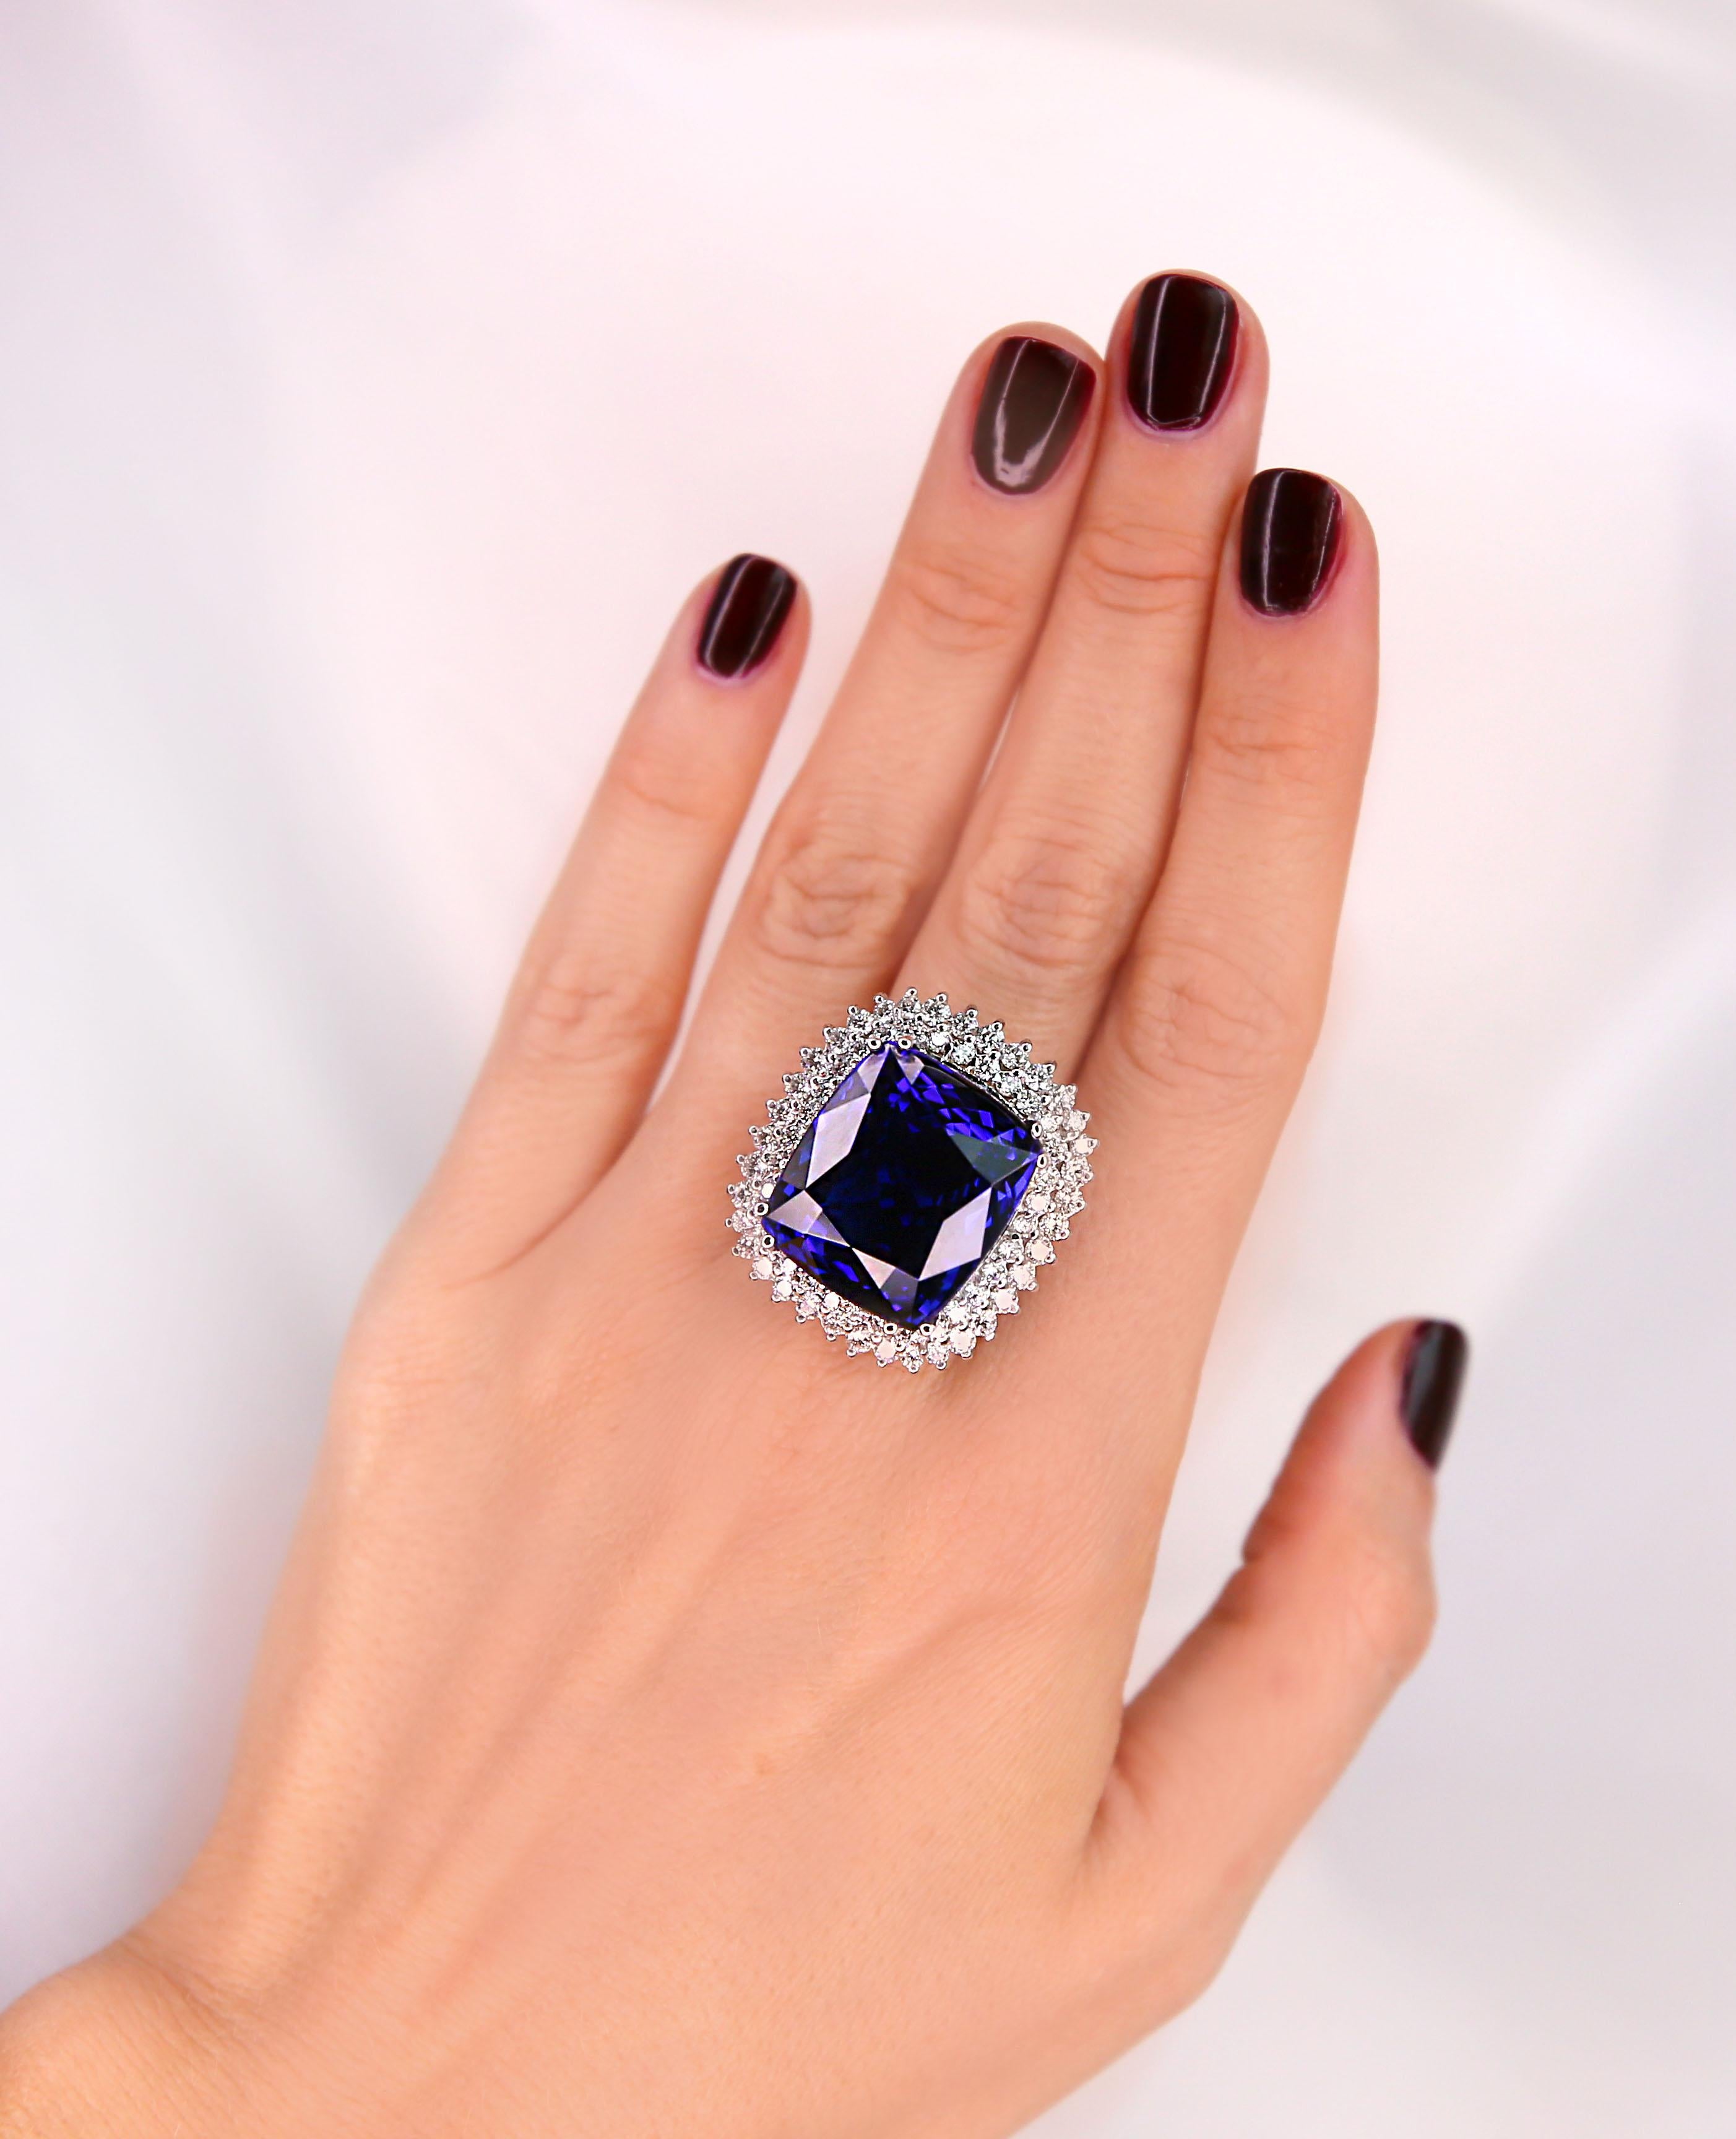 White gold ladies cast tanzanite and diamond ring with a bright polish finish. 
The featured tanzanite is set within tiered diamond bezels, completed by a two and one-half millimeter wide band. 
Identified with markings of 